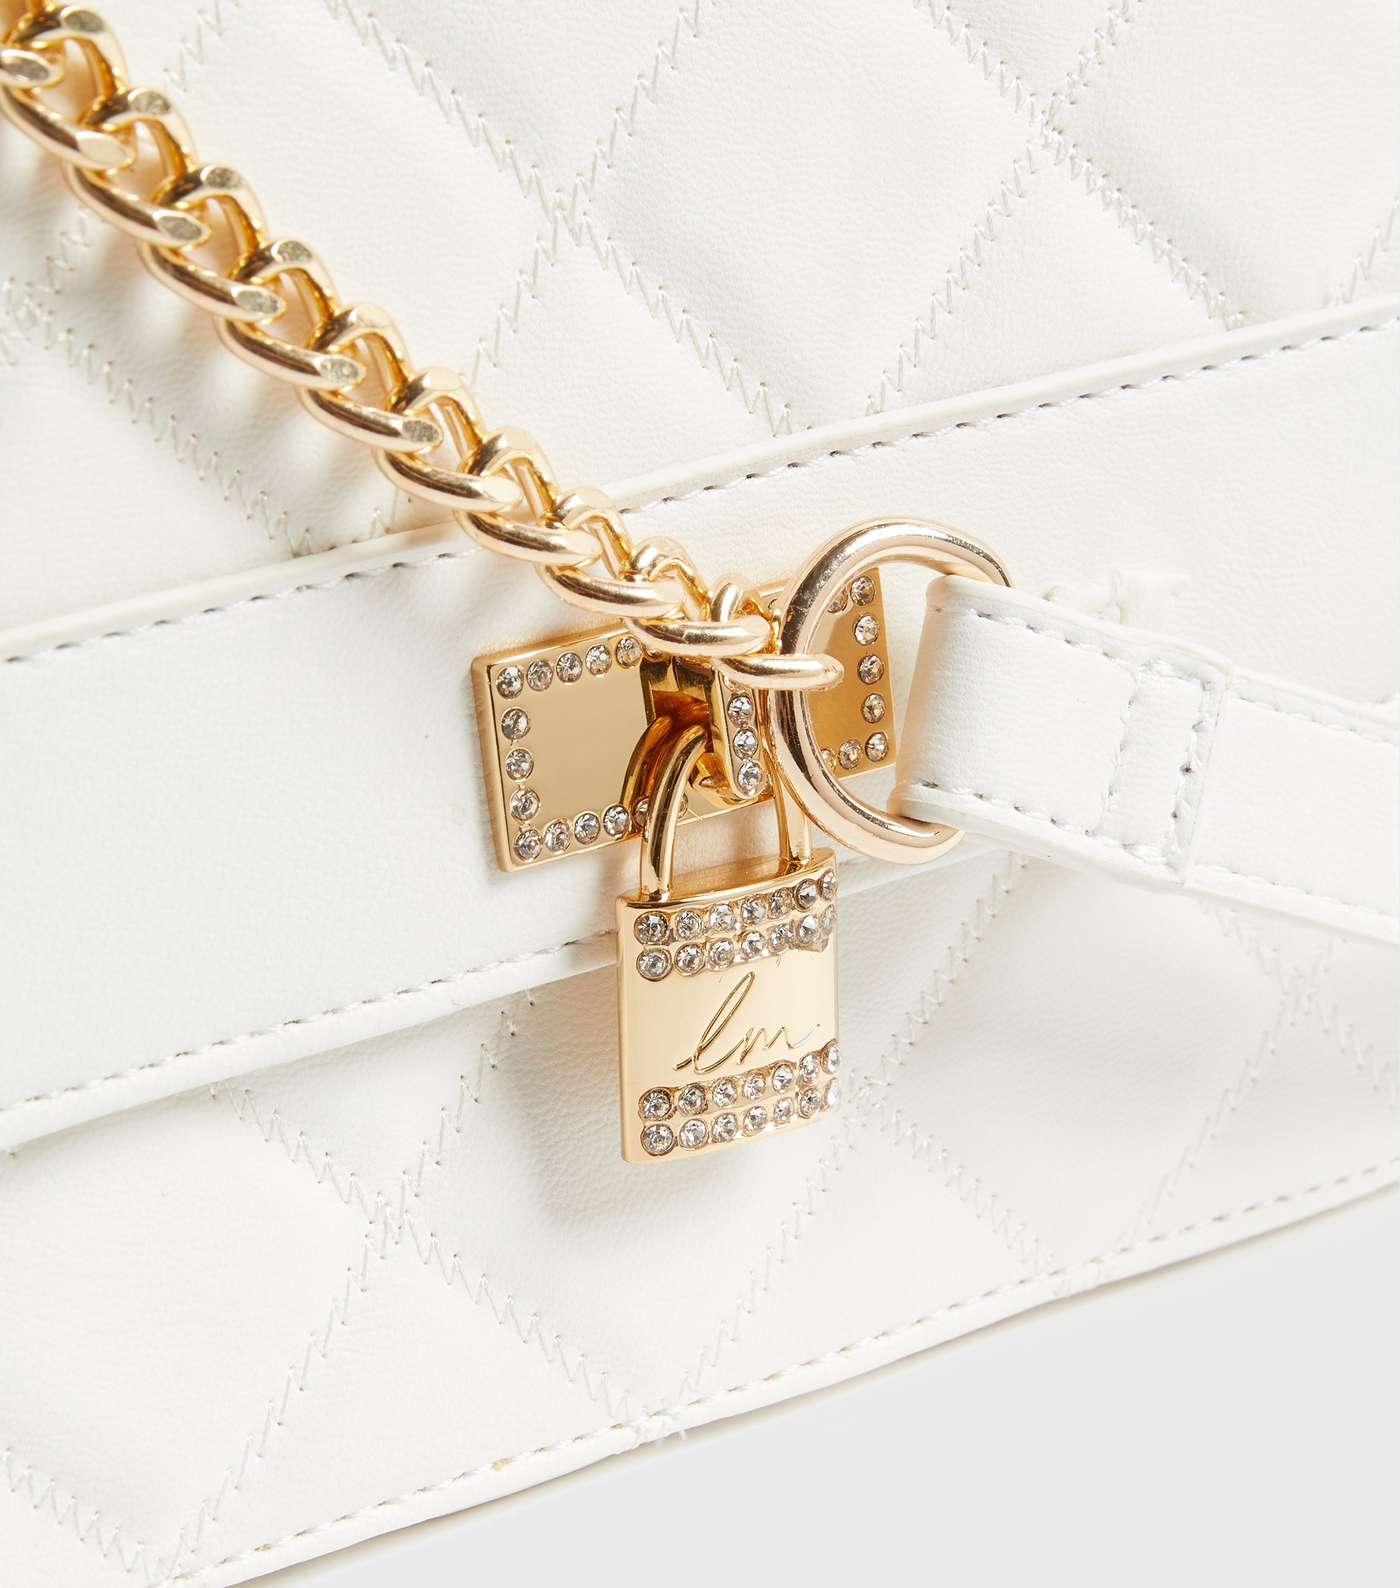 Little Mistress White Quilted Chain Cross Body Bag Image 3